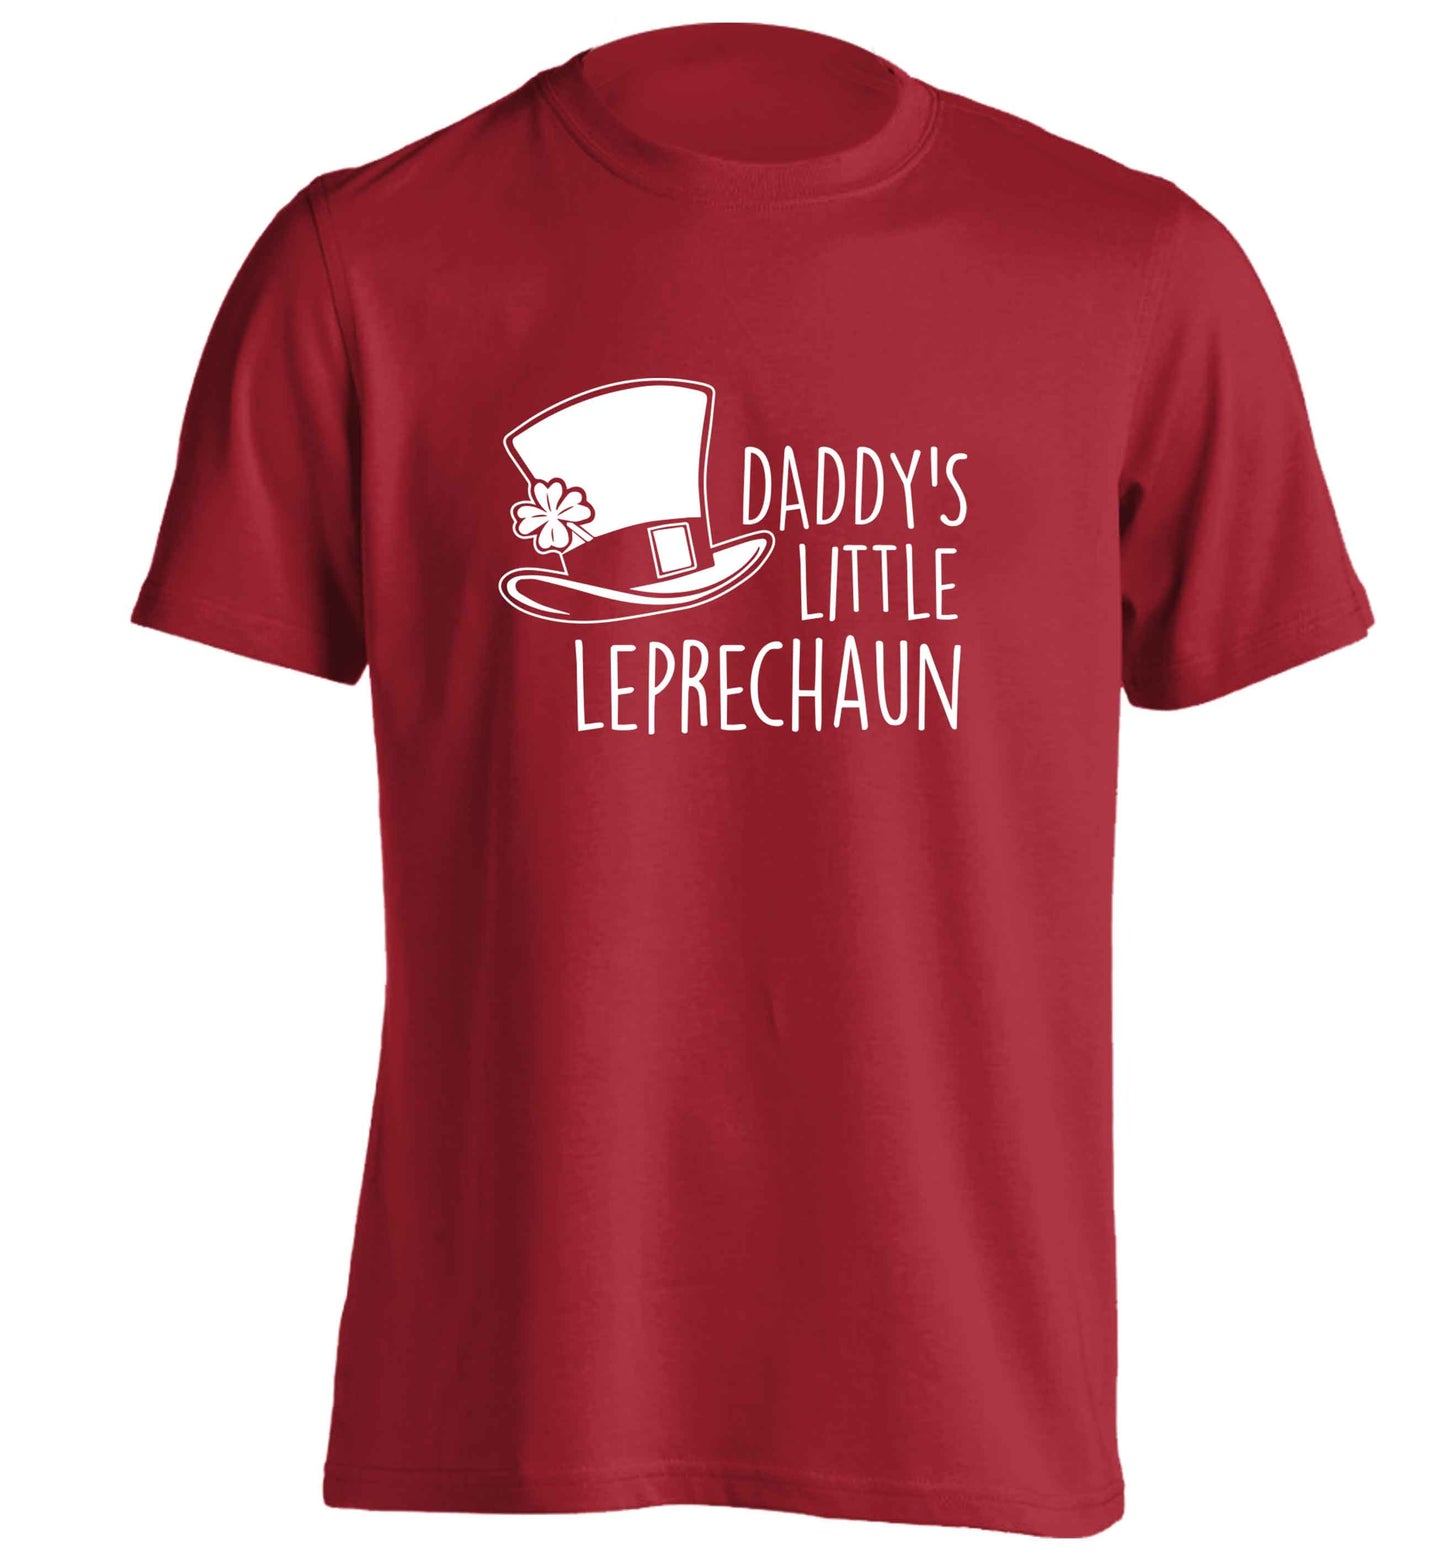 Daddy's lucky charm adults unisex red Tshirt 2XL